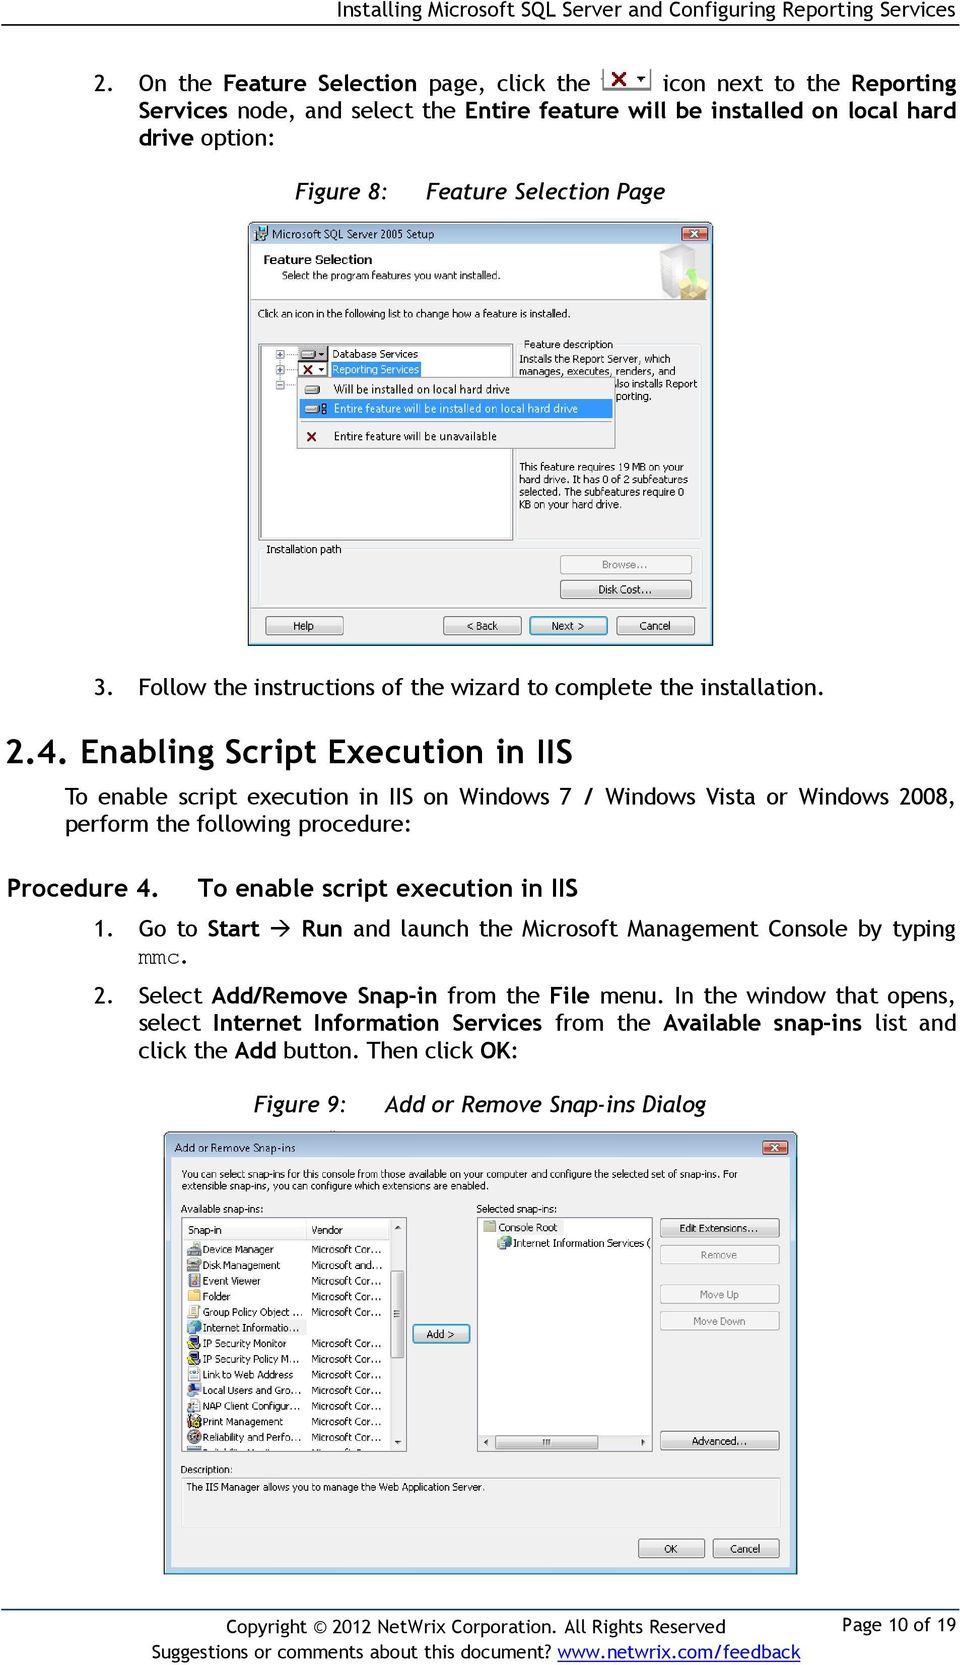 Enabling Script Execution in IIS To enable script execution in IIS on Windows 7 / Windows Vista or Windows 2008, perform the following procedure: Procedure 4. To enable script execution in IIS 1.